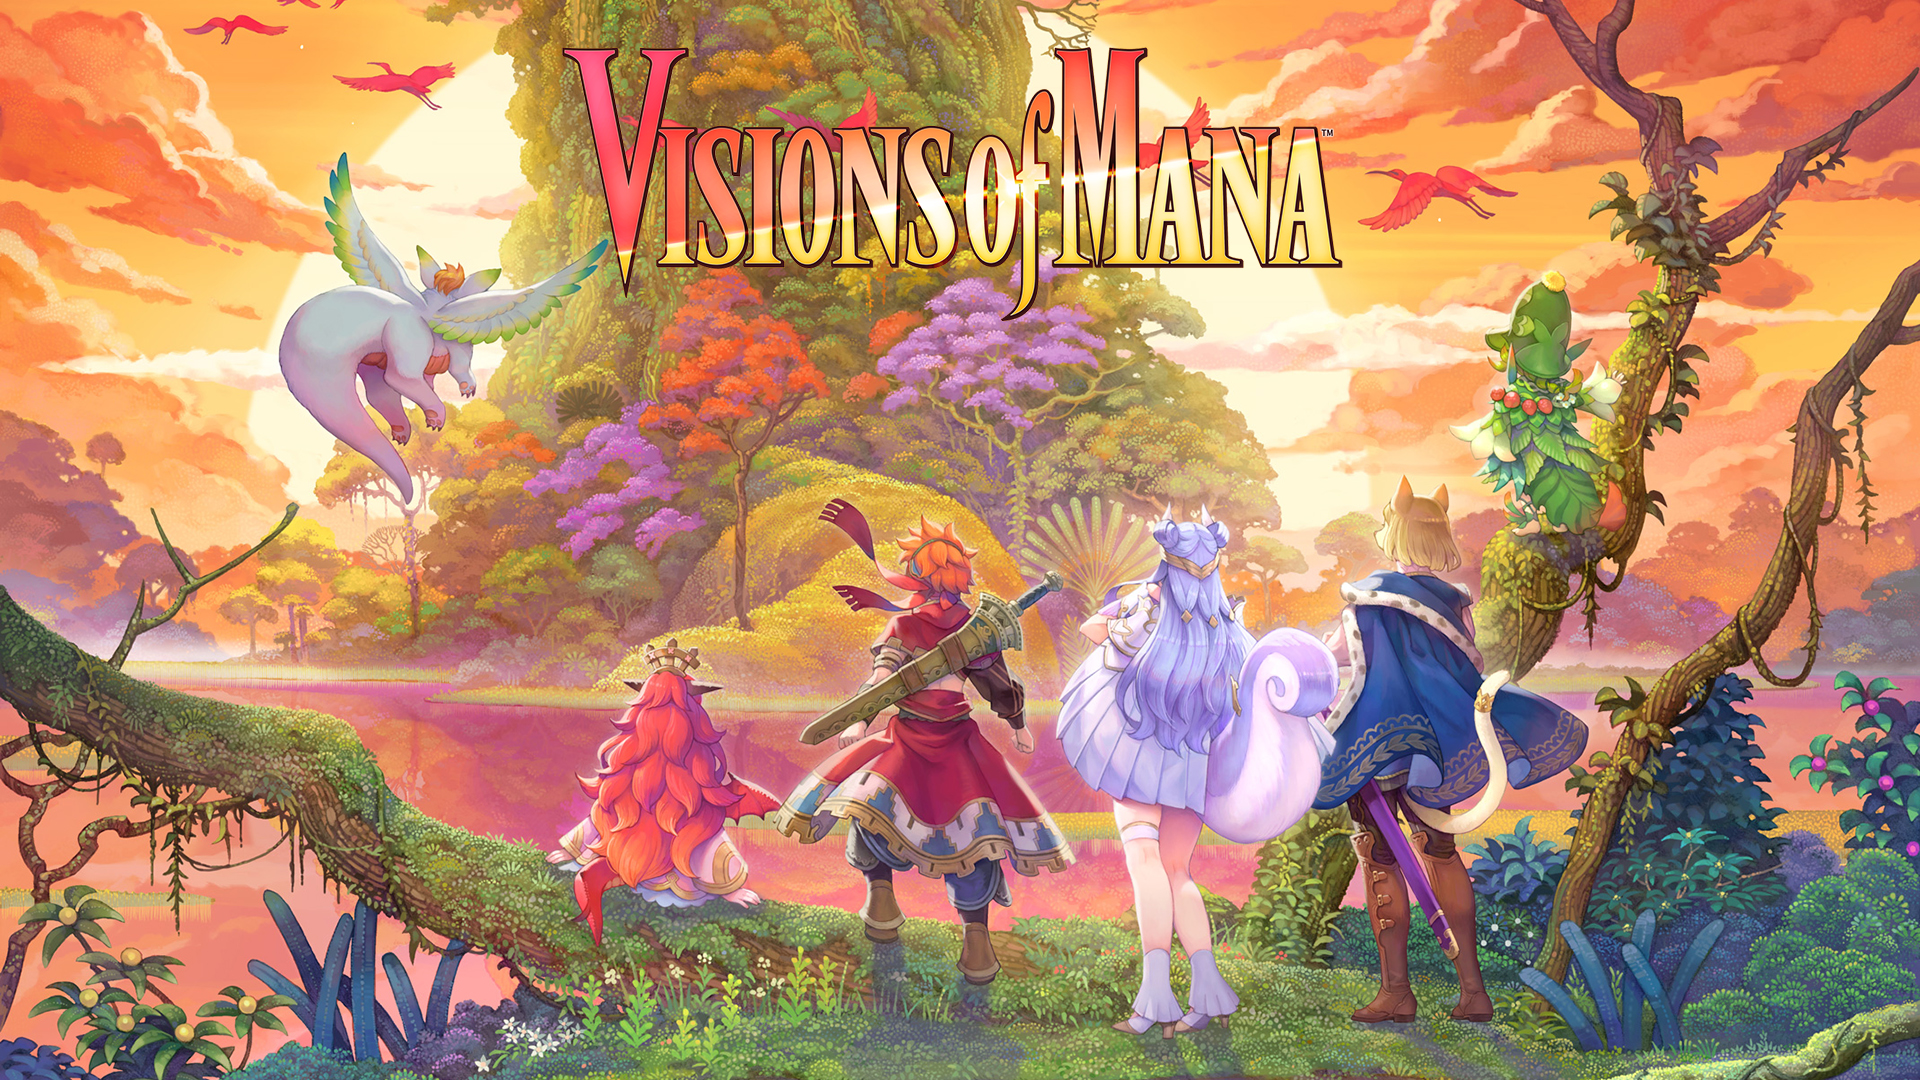 Vision of Mana's announcement artwork, cropped and with logo added.